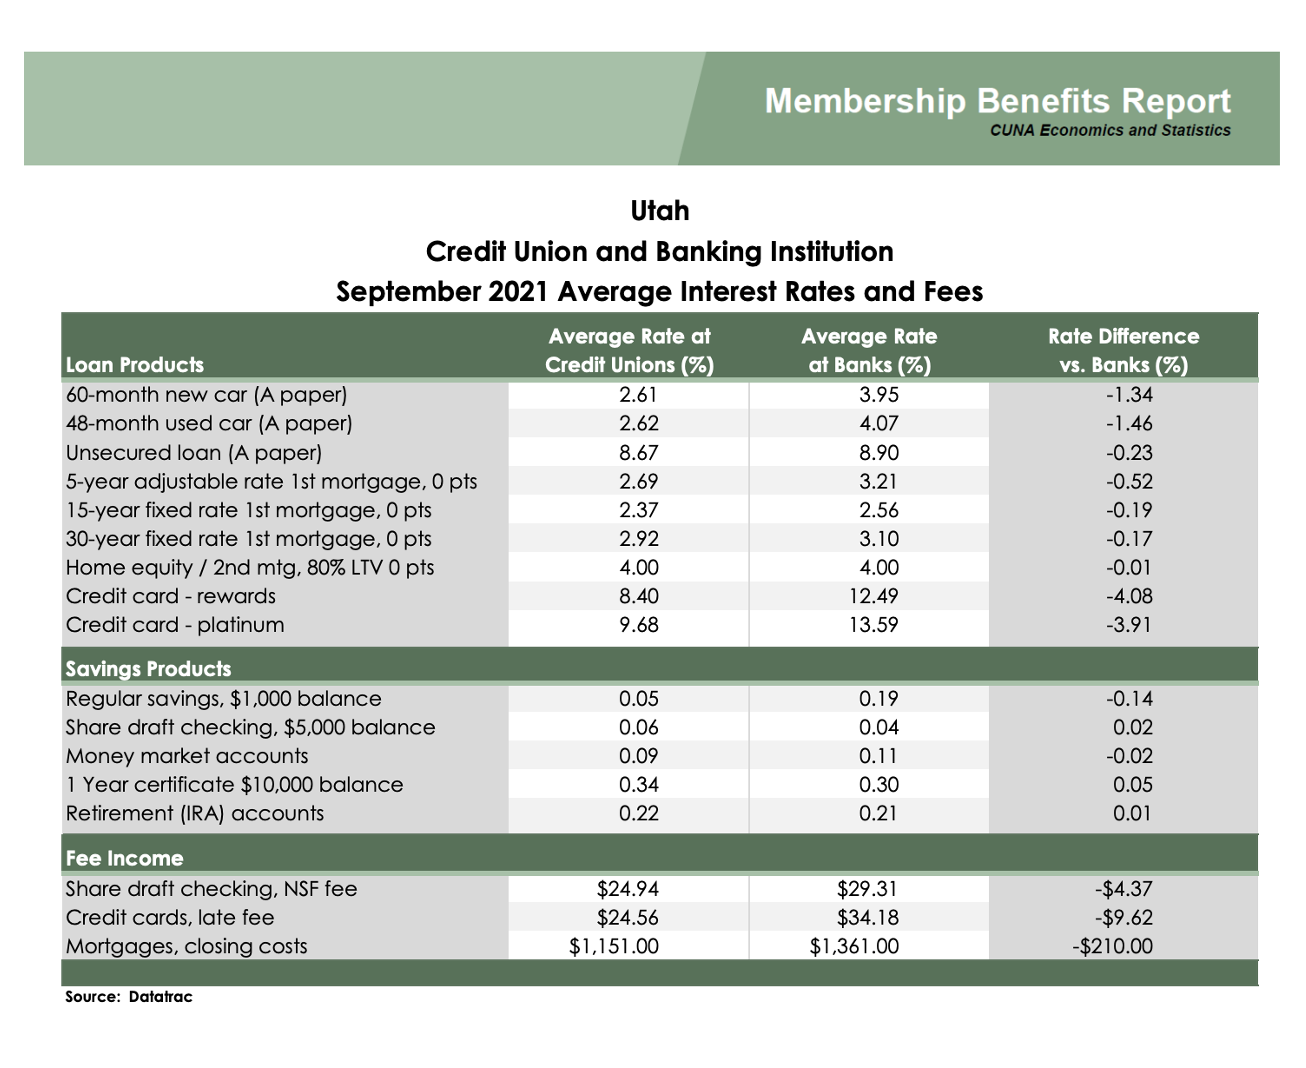 Table of financial benefits of credit unions